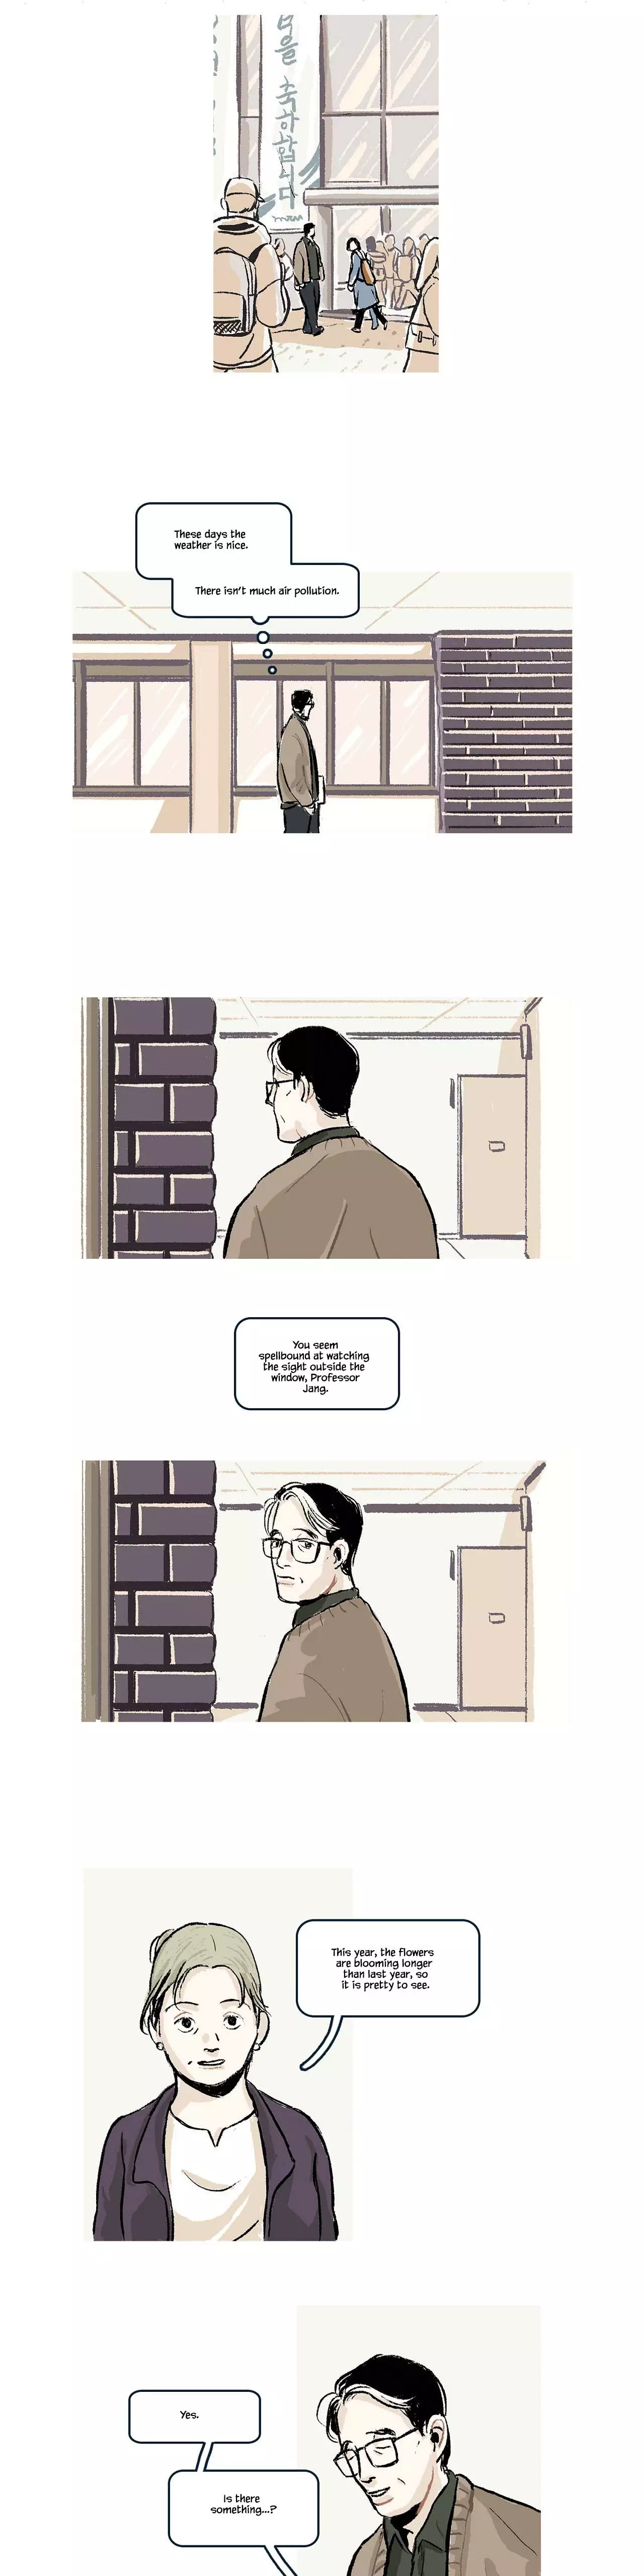 The Professor Who Reads Love Stories - 15 page 5-11497a72